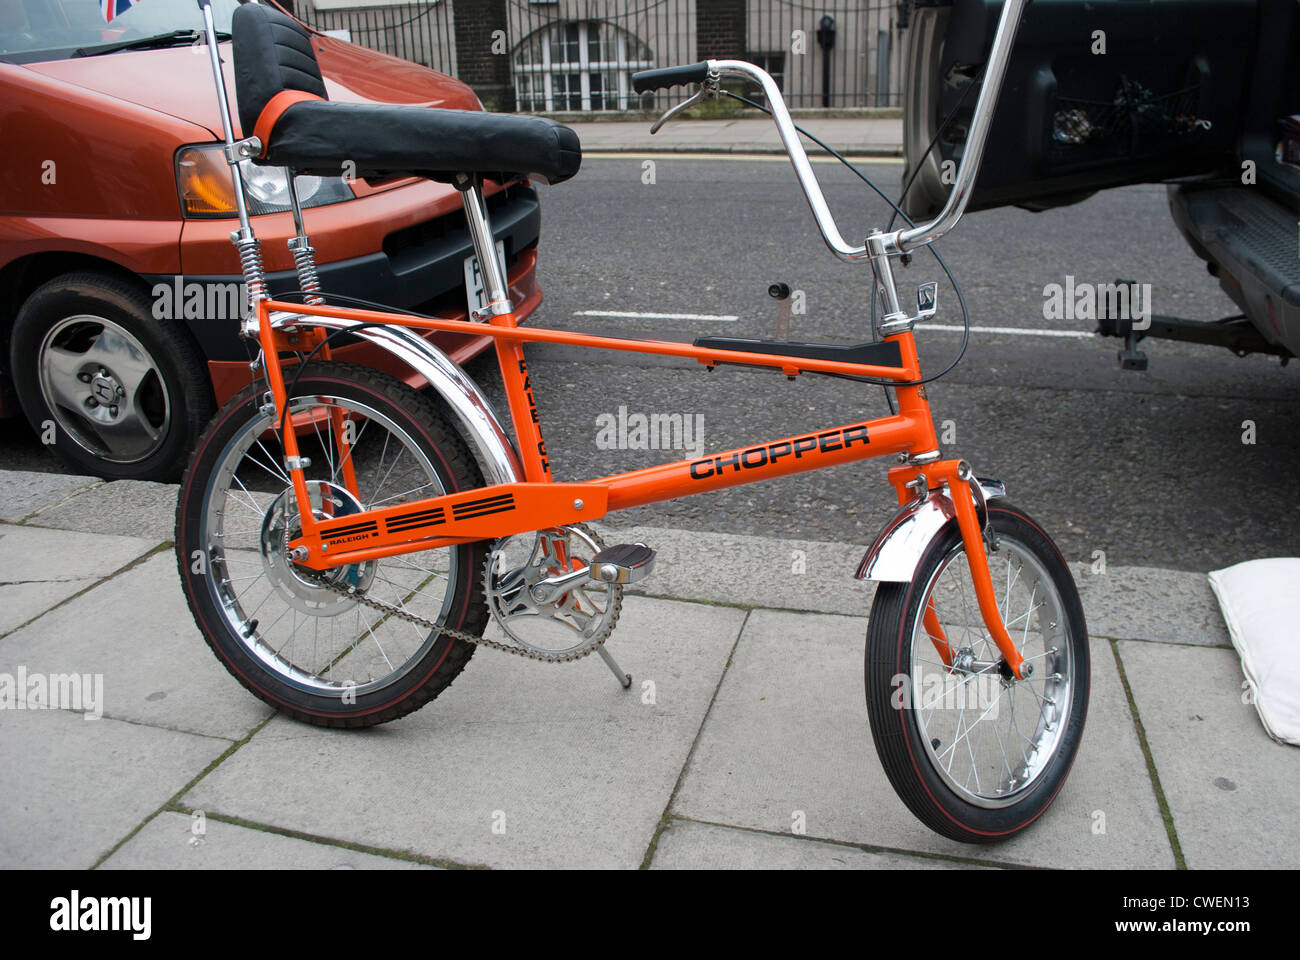 Classic kids' Chopper bike from 1970s is BACK - but the price tag is  eye-watering - Mirror Online